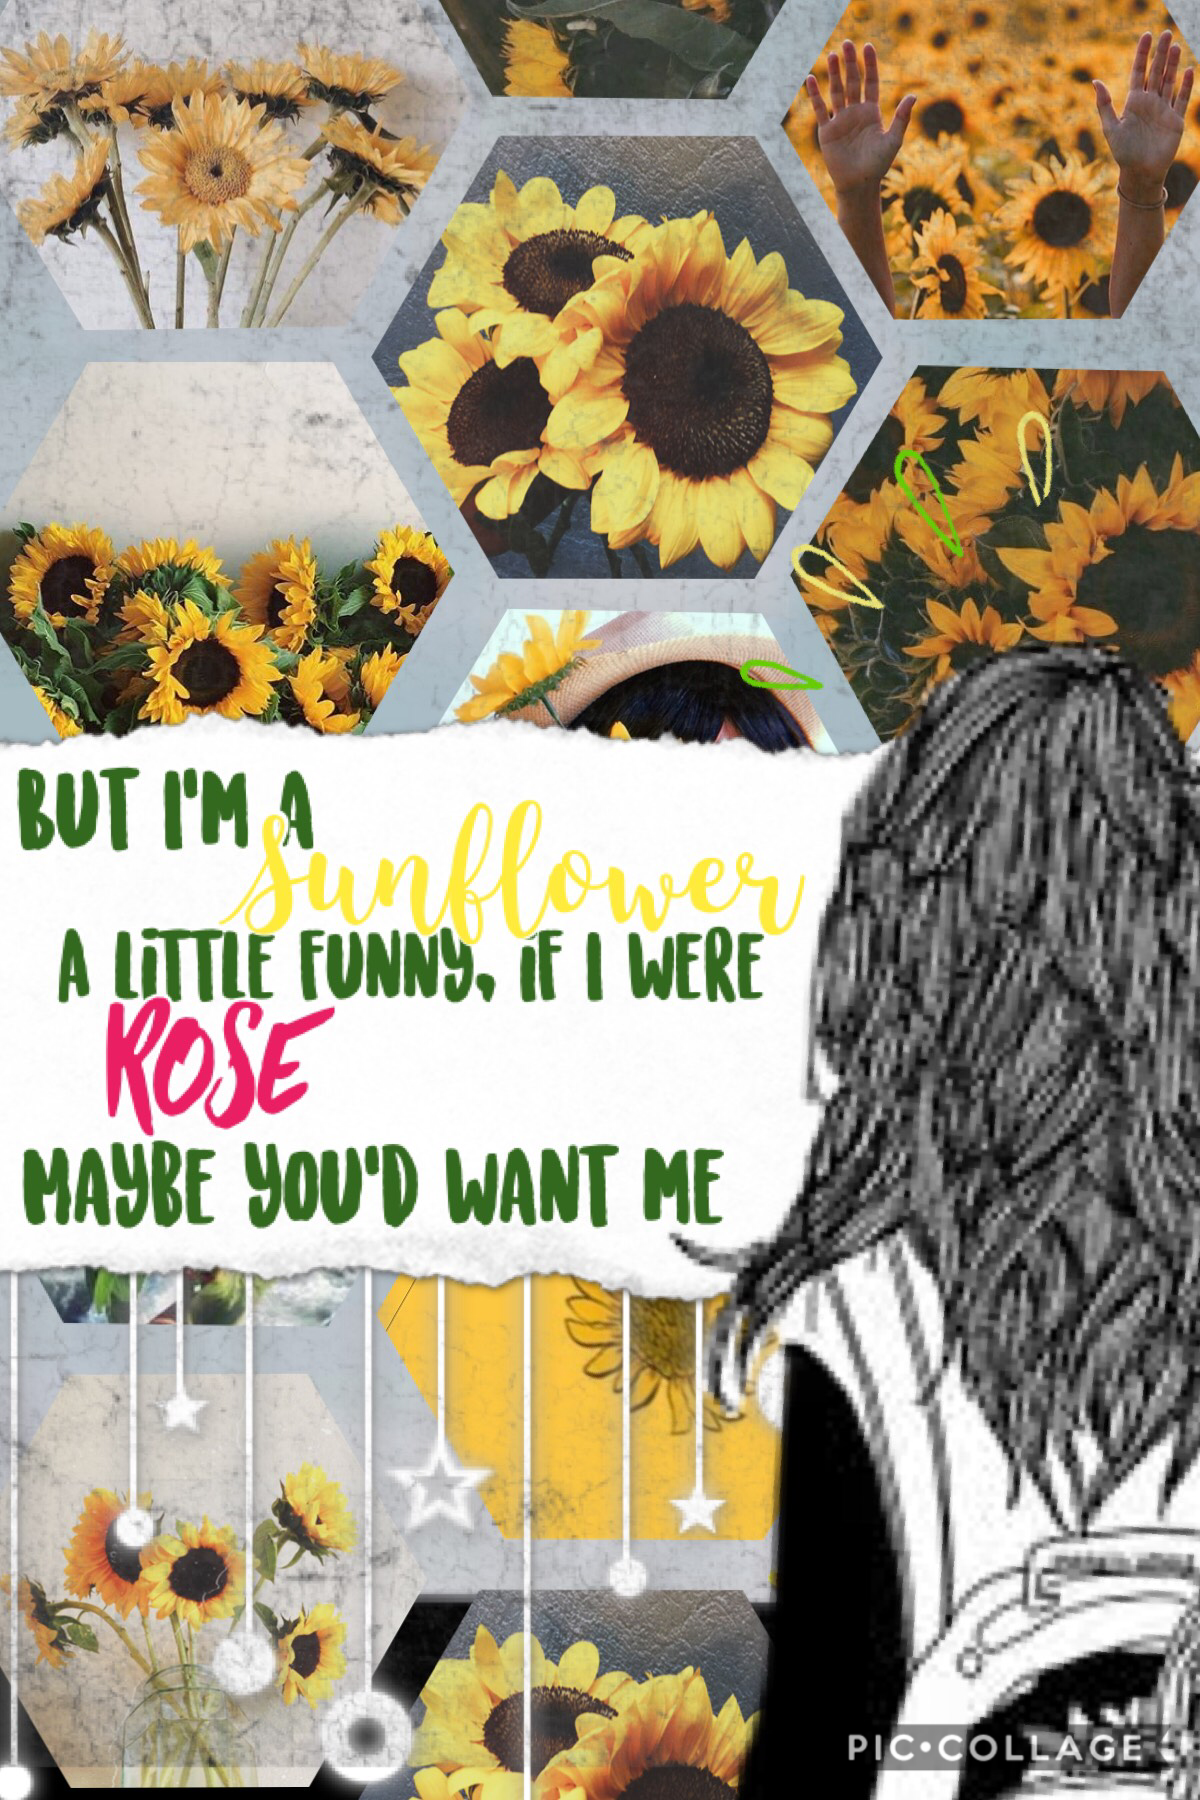 🌻My new favorite song 🌻 
Rate out of 10. I’m really proud of this collage what do you think 🌻🌻🌻🌻🌻